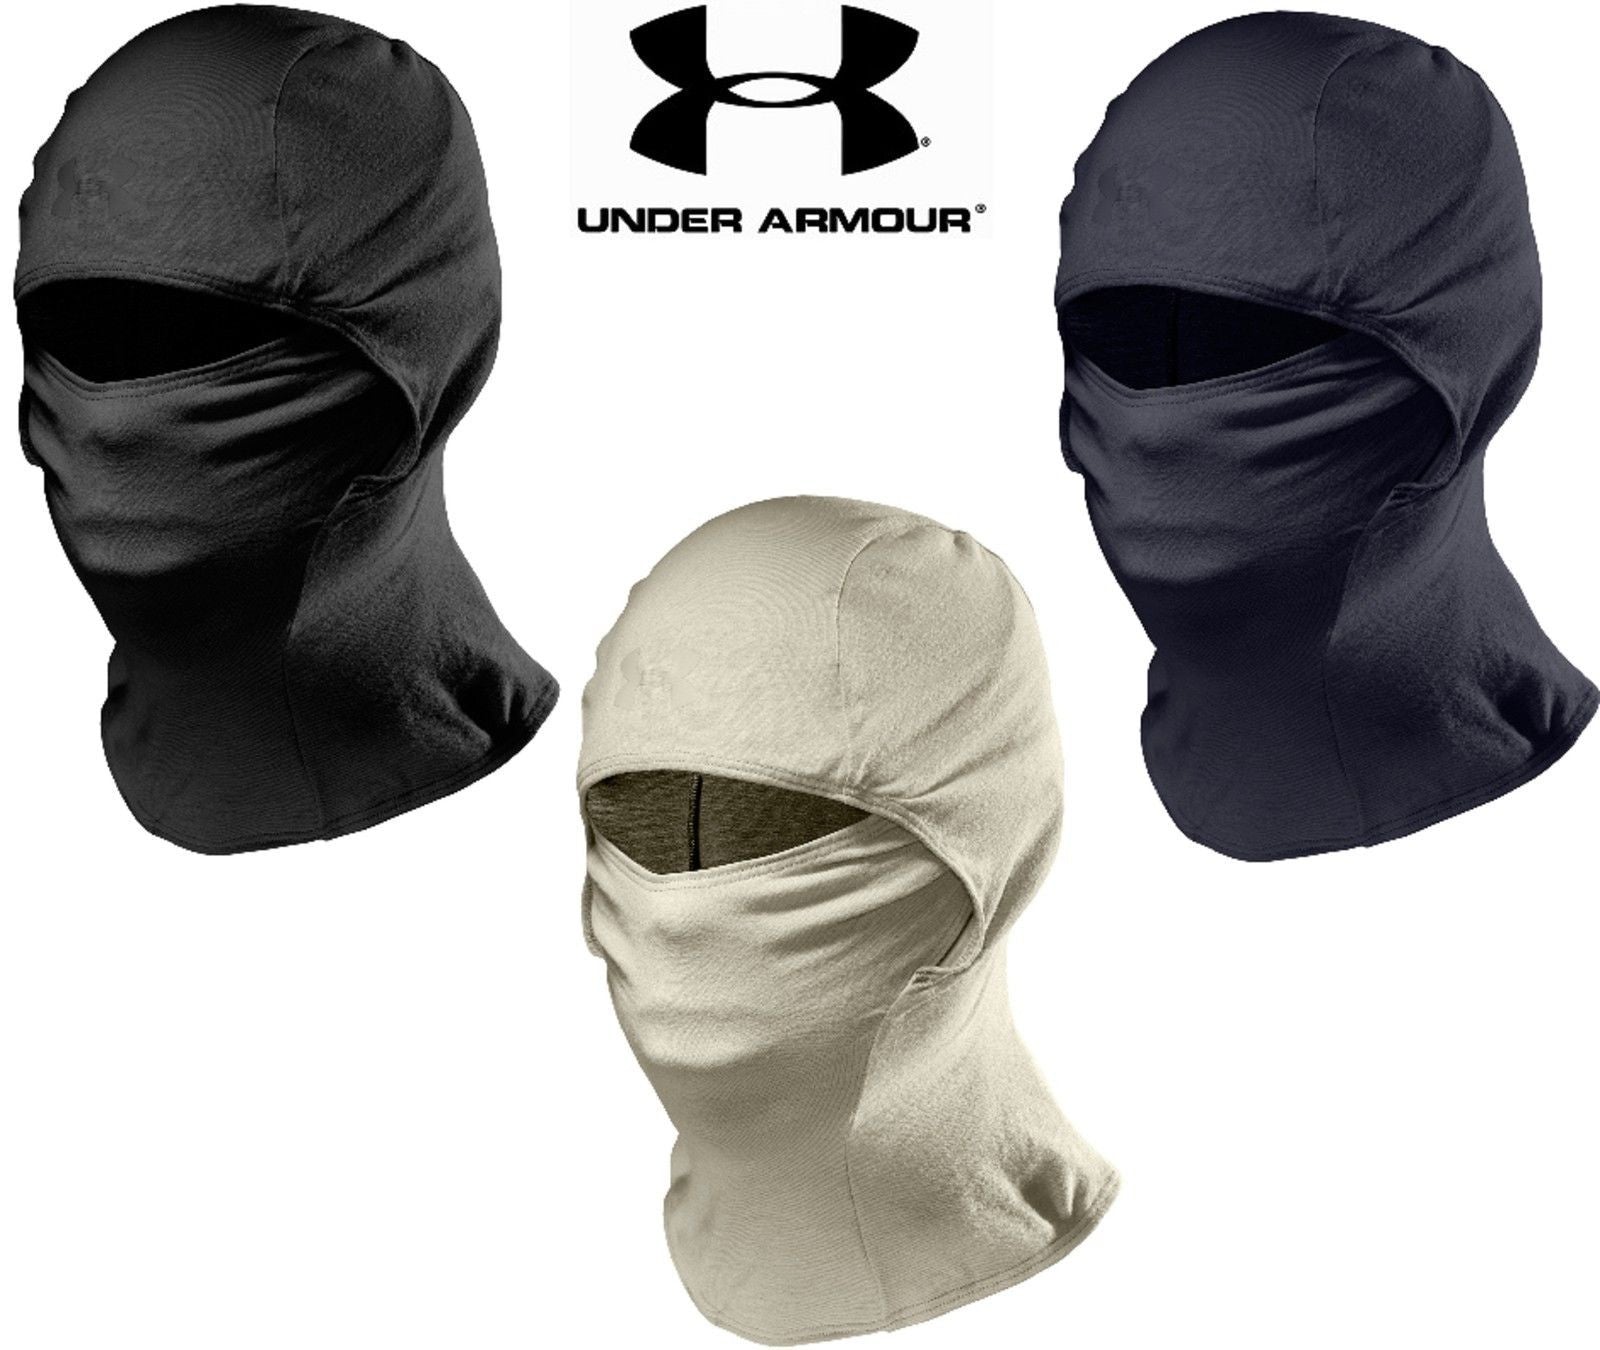 Under Armour Tactical Fire-Resistant 